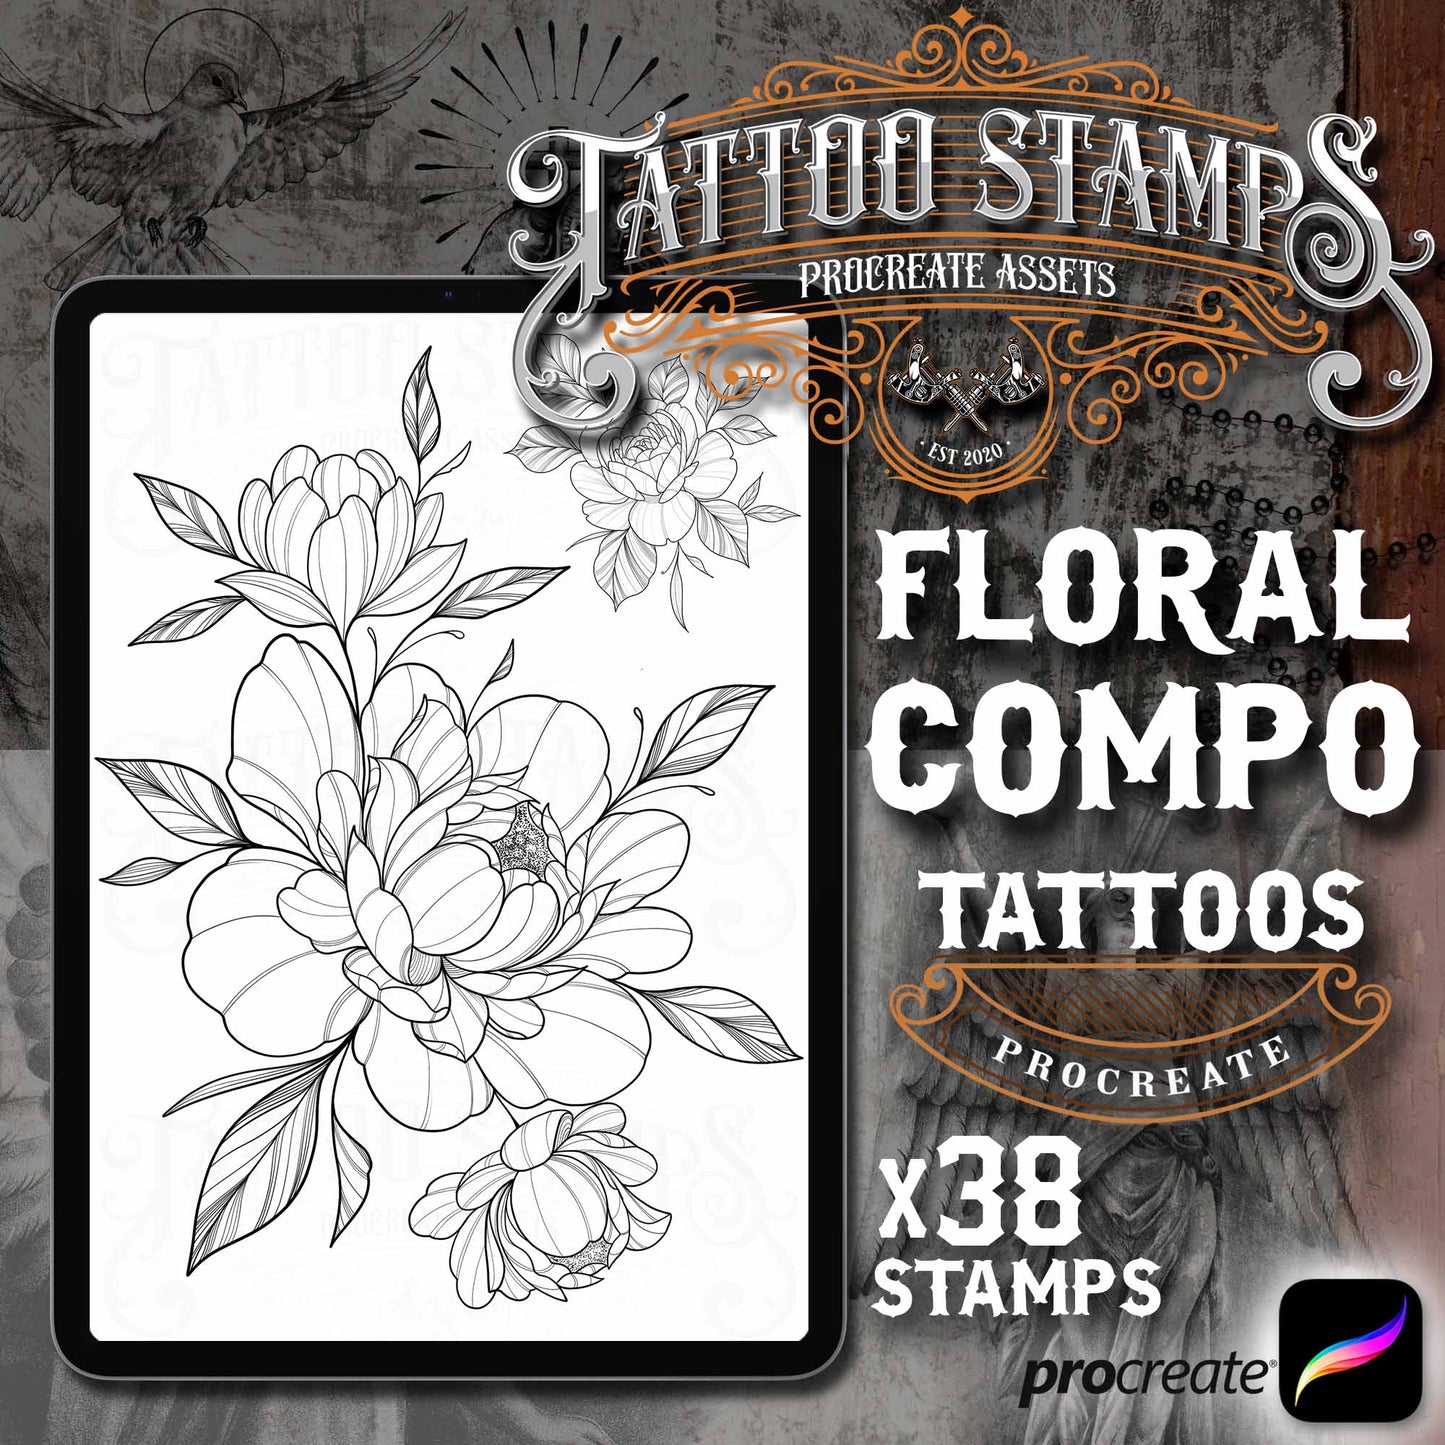 38 Floral Compositions Tattoo Brushes for Procreate in the Master Pack by TattooStamps